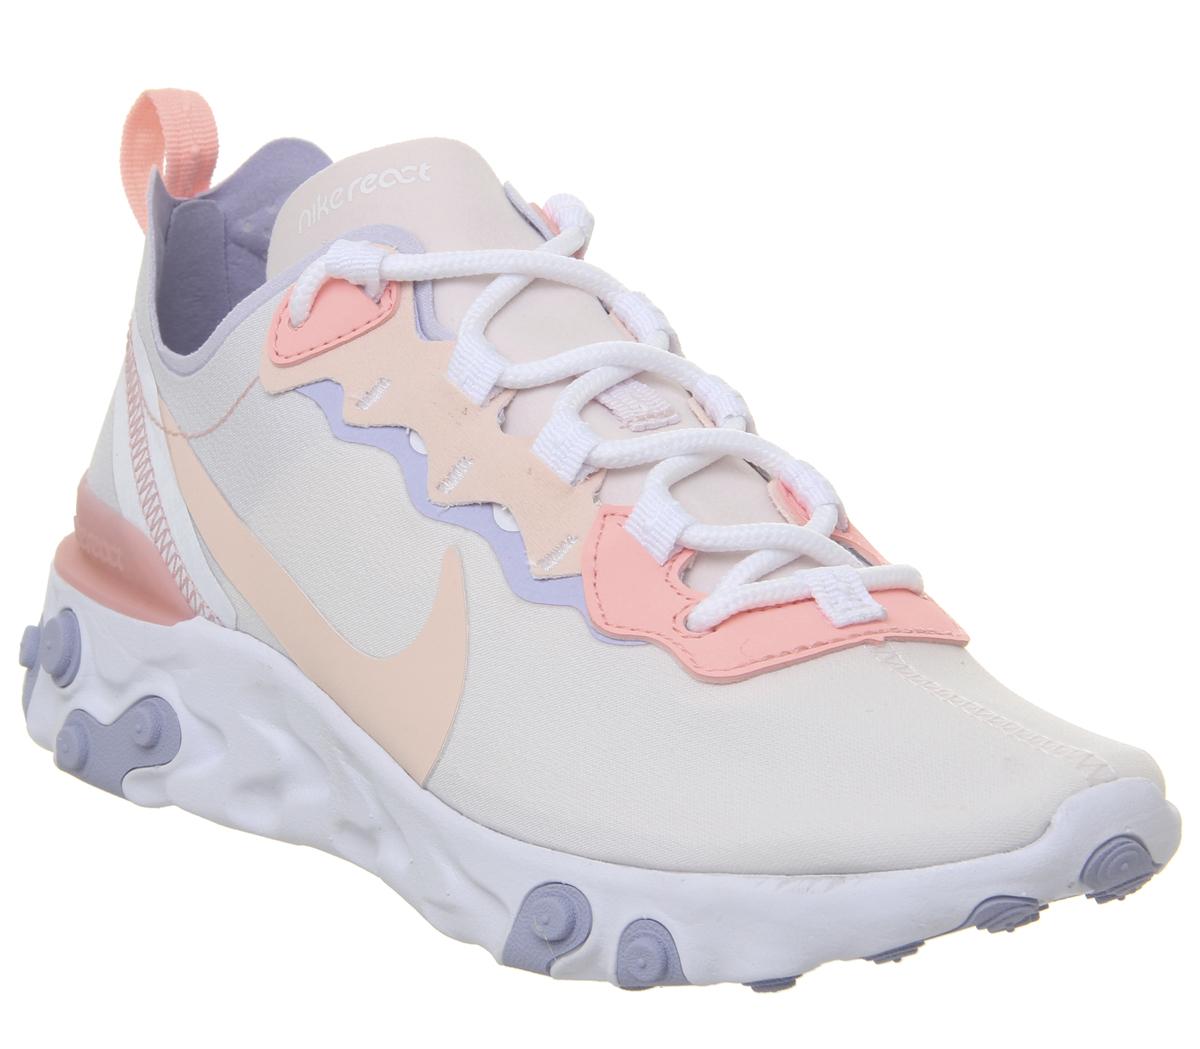 Nike React Element 55 Trainers Pale 